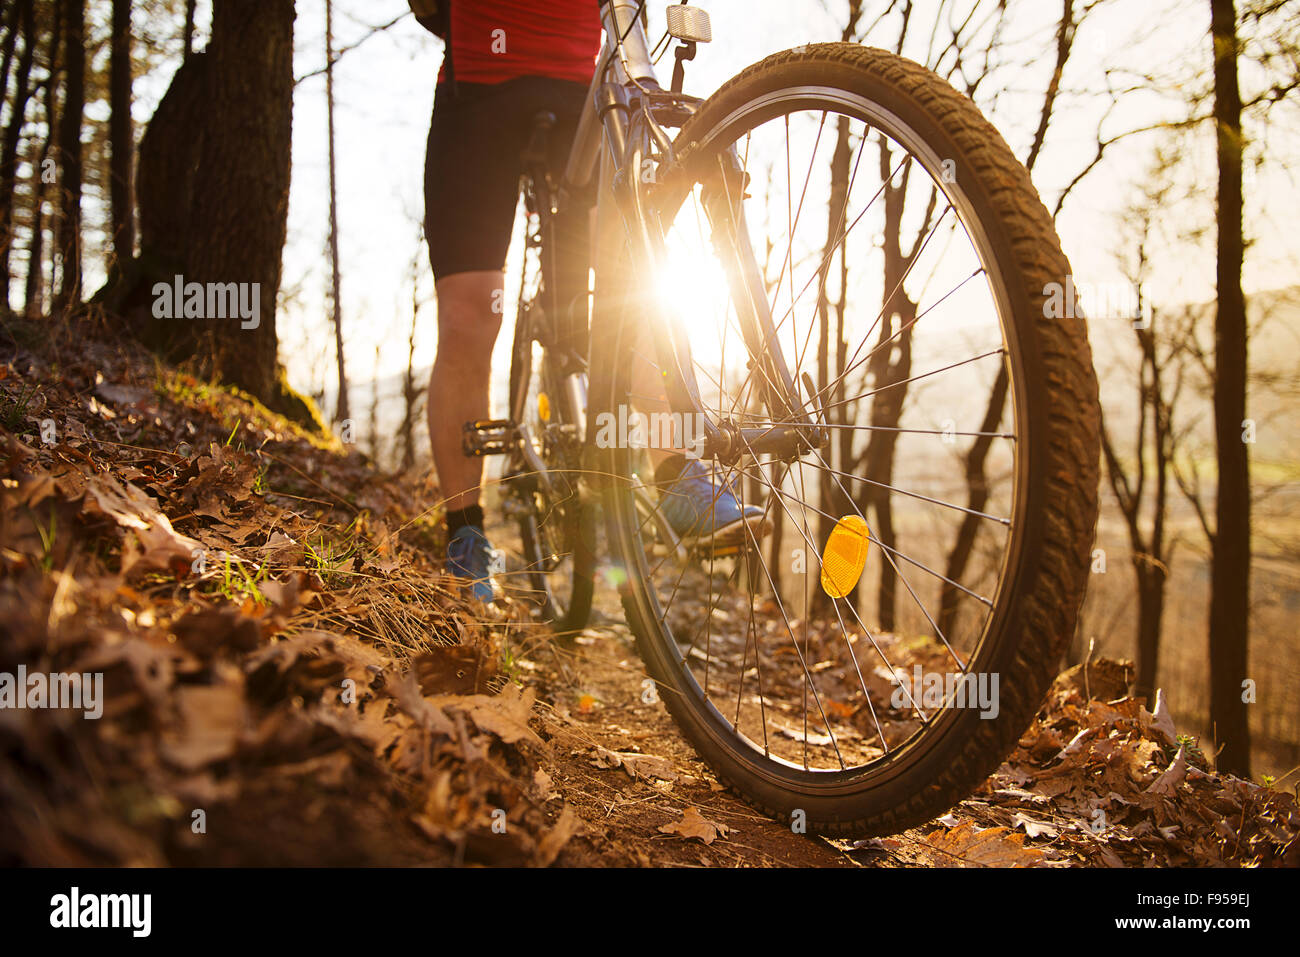 Closeup of cyclist man legs riding mountain bike on outdoor trail in autumn forest Stock Photo